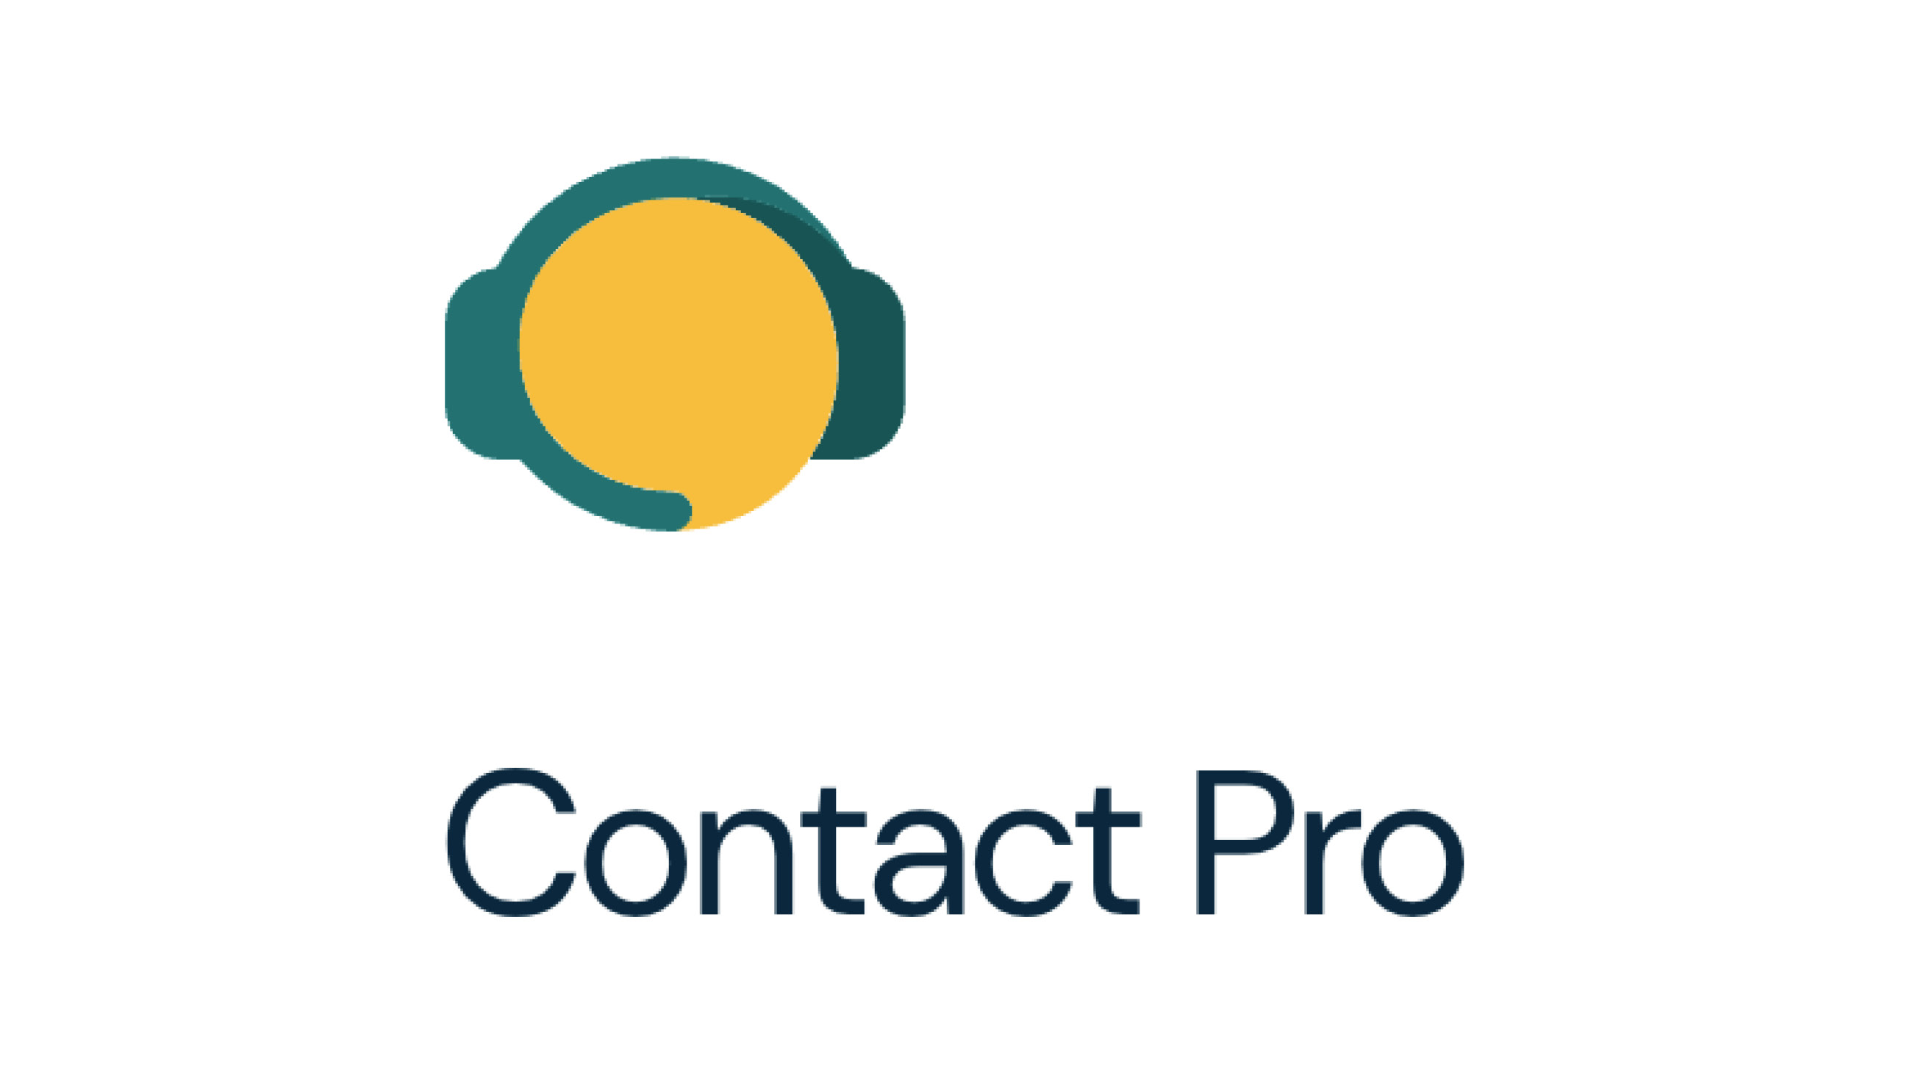 Conctact Pro by Sinch